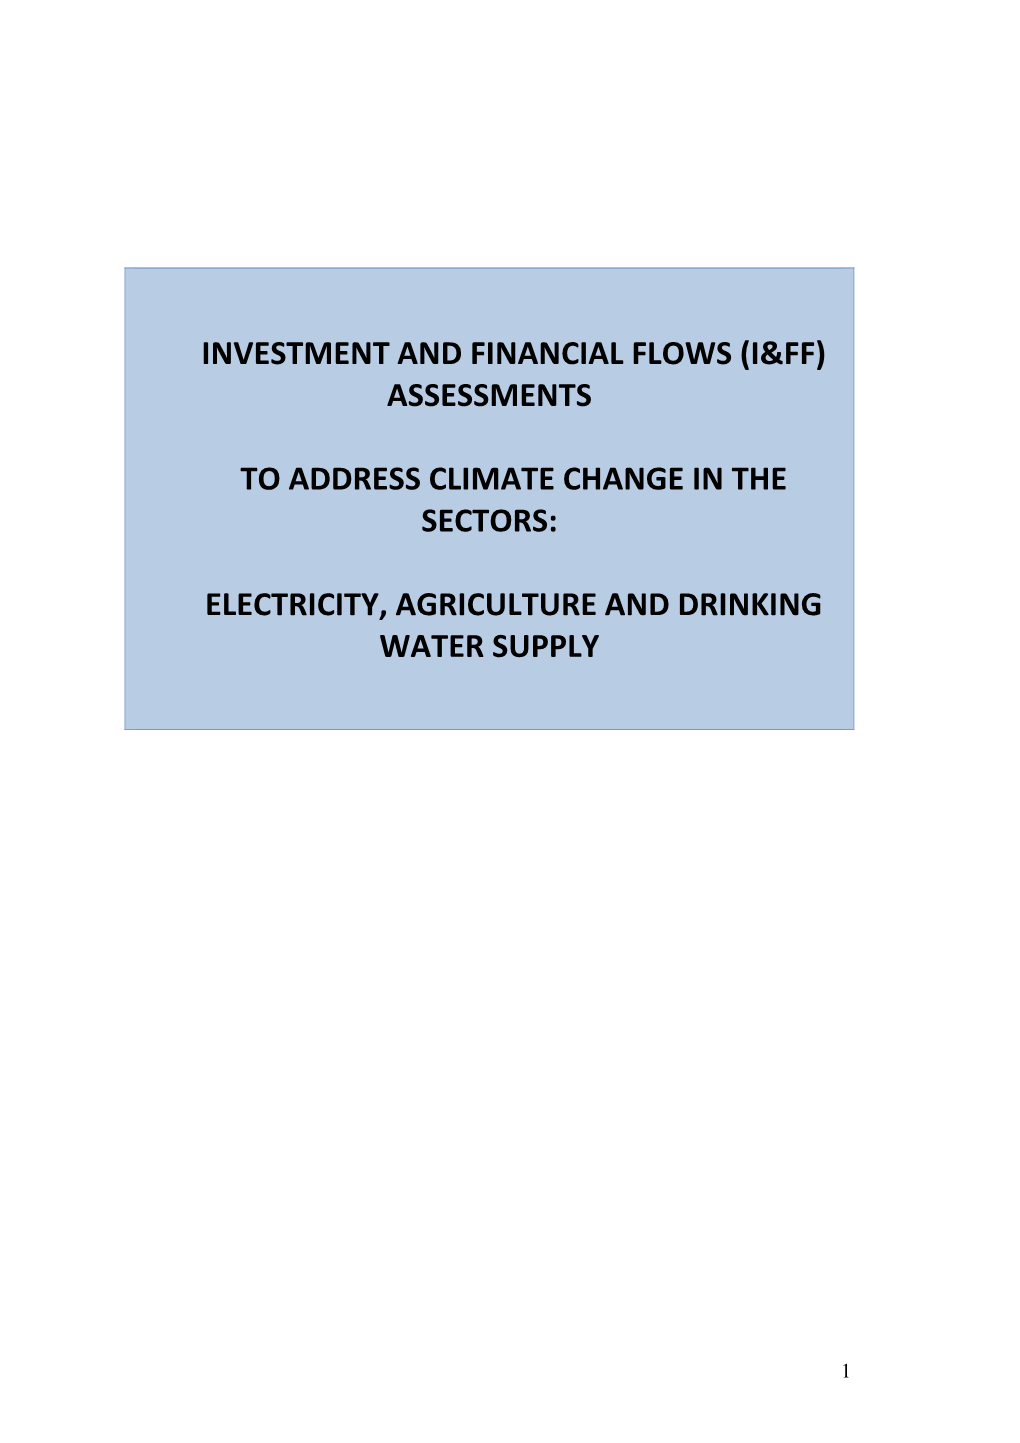 Investment and Financial Flows (I&Ff) Assessments to Address Climate Change in the Sectors: Electricity, Agriculture And